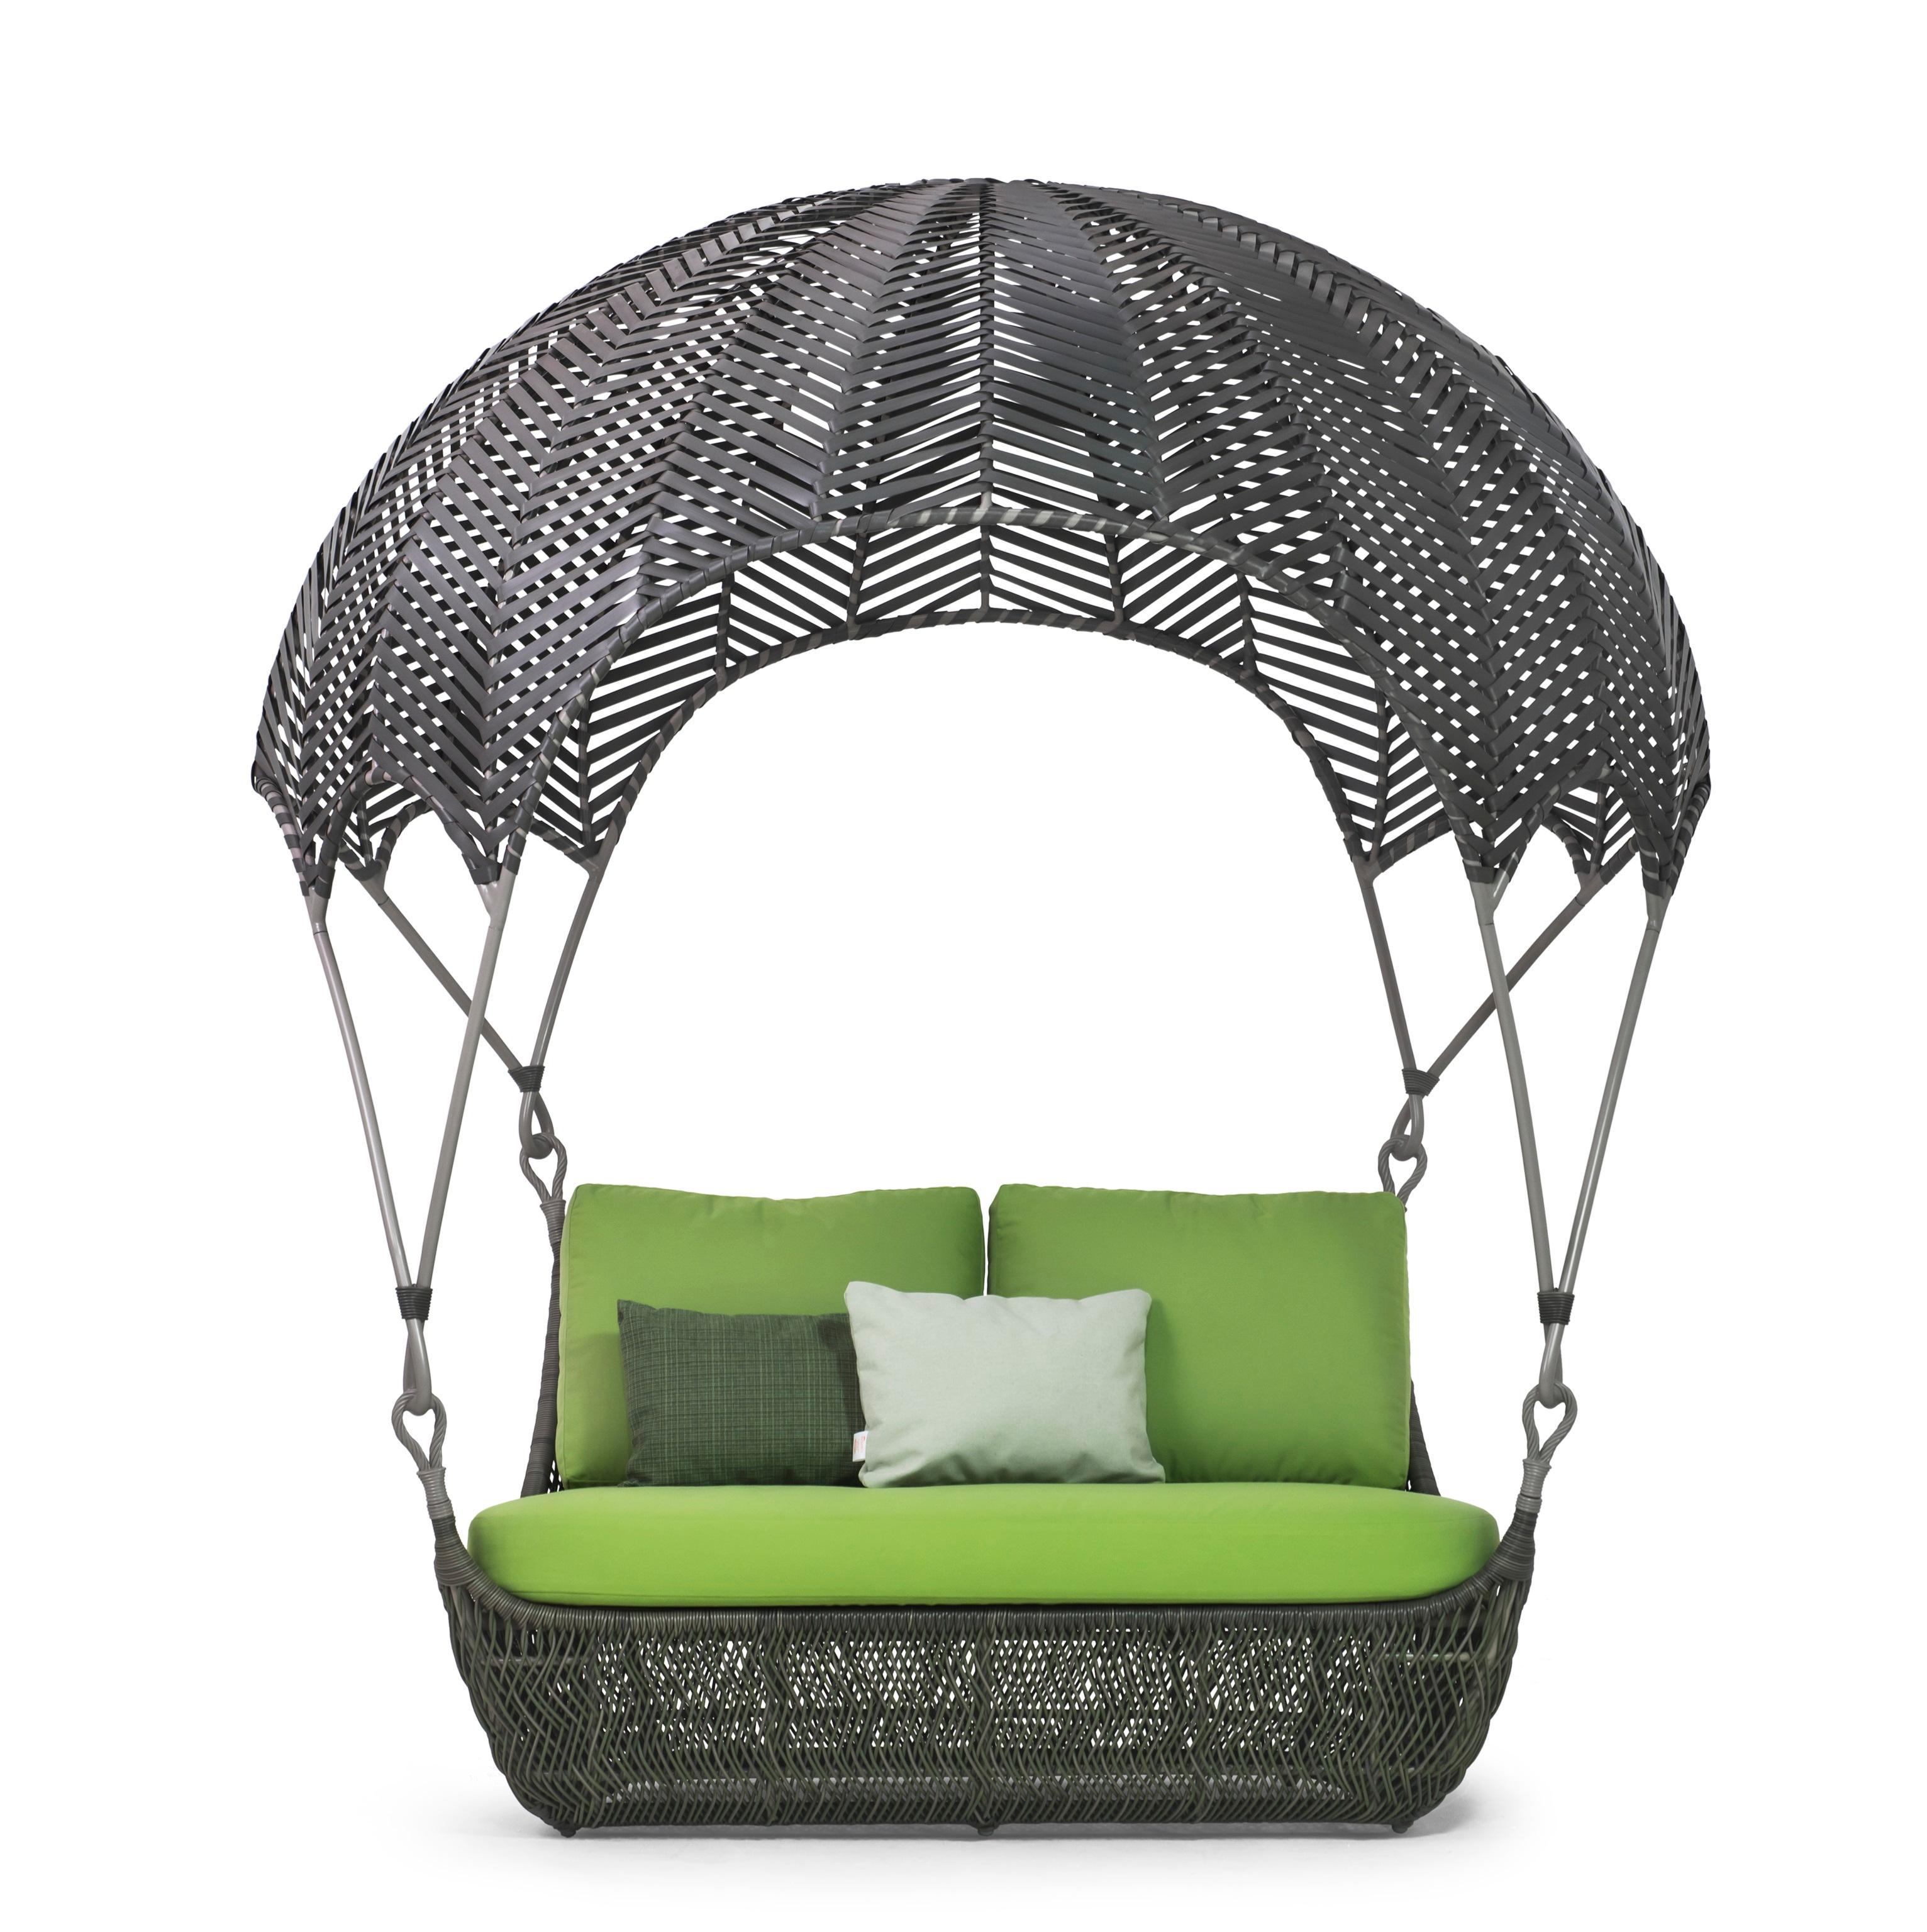 Russell loveseat by Kenneth Cobonpue.
Materials: Polyethyelene, Aluminum. 
Dimensions: 160cm x 202cm x h 220cm

Russell brings the allure of escape to your space. Rest in its airy woven frame as stories of adventure across the land, seas, and